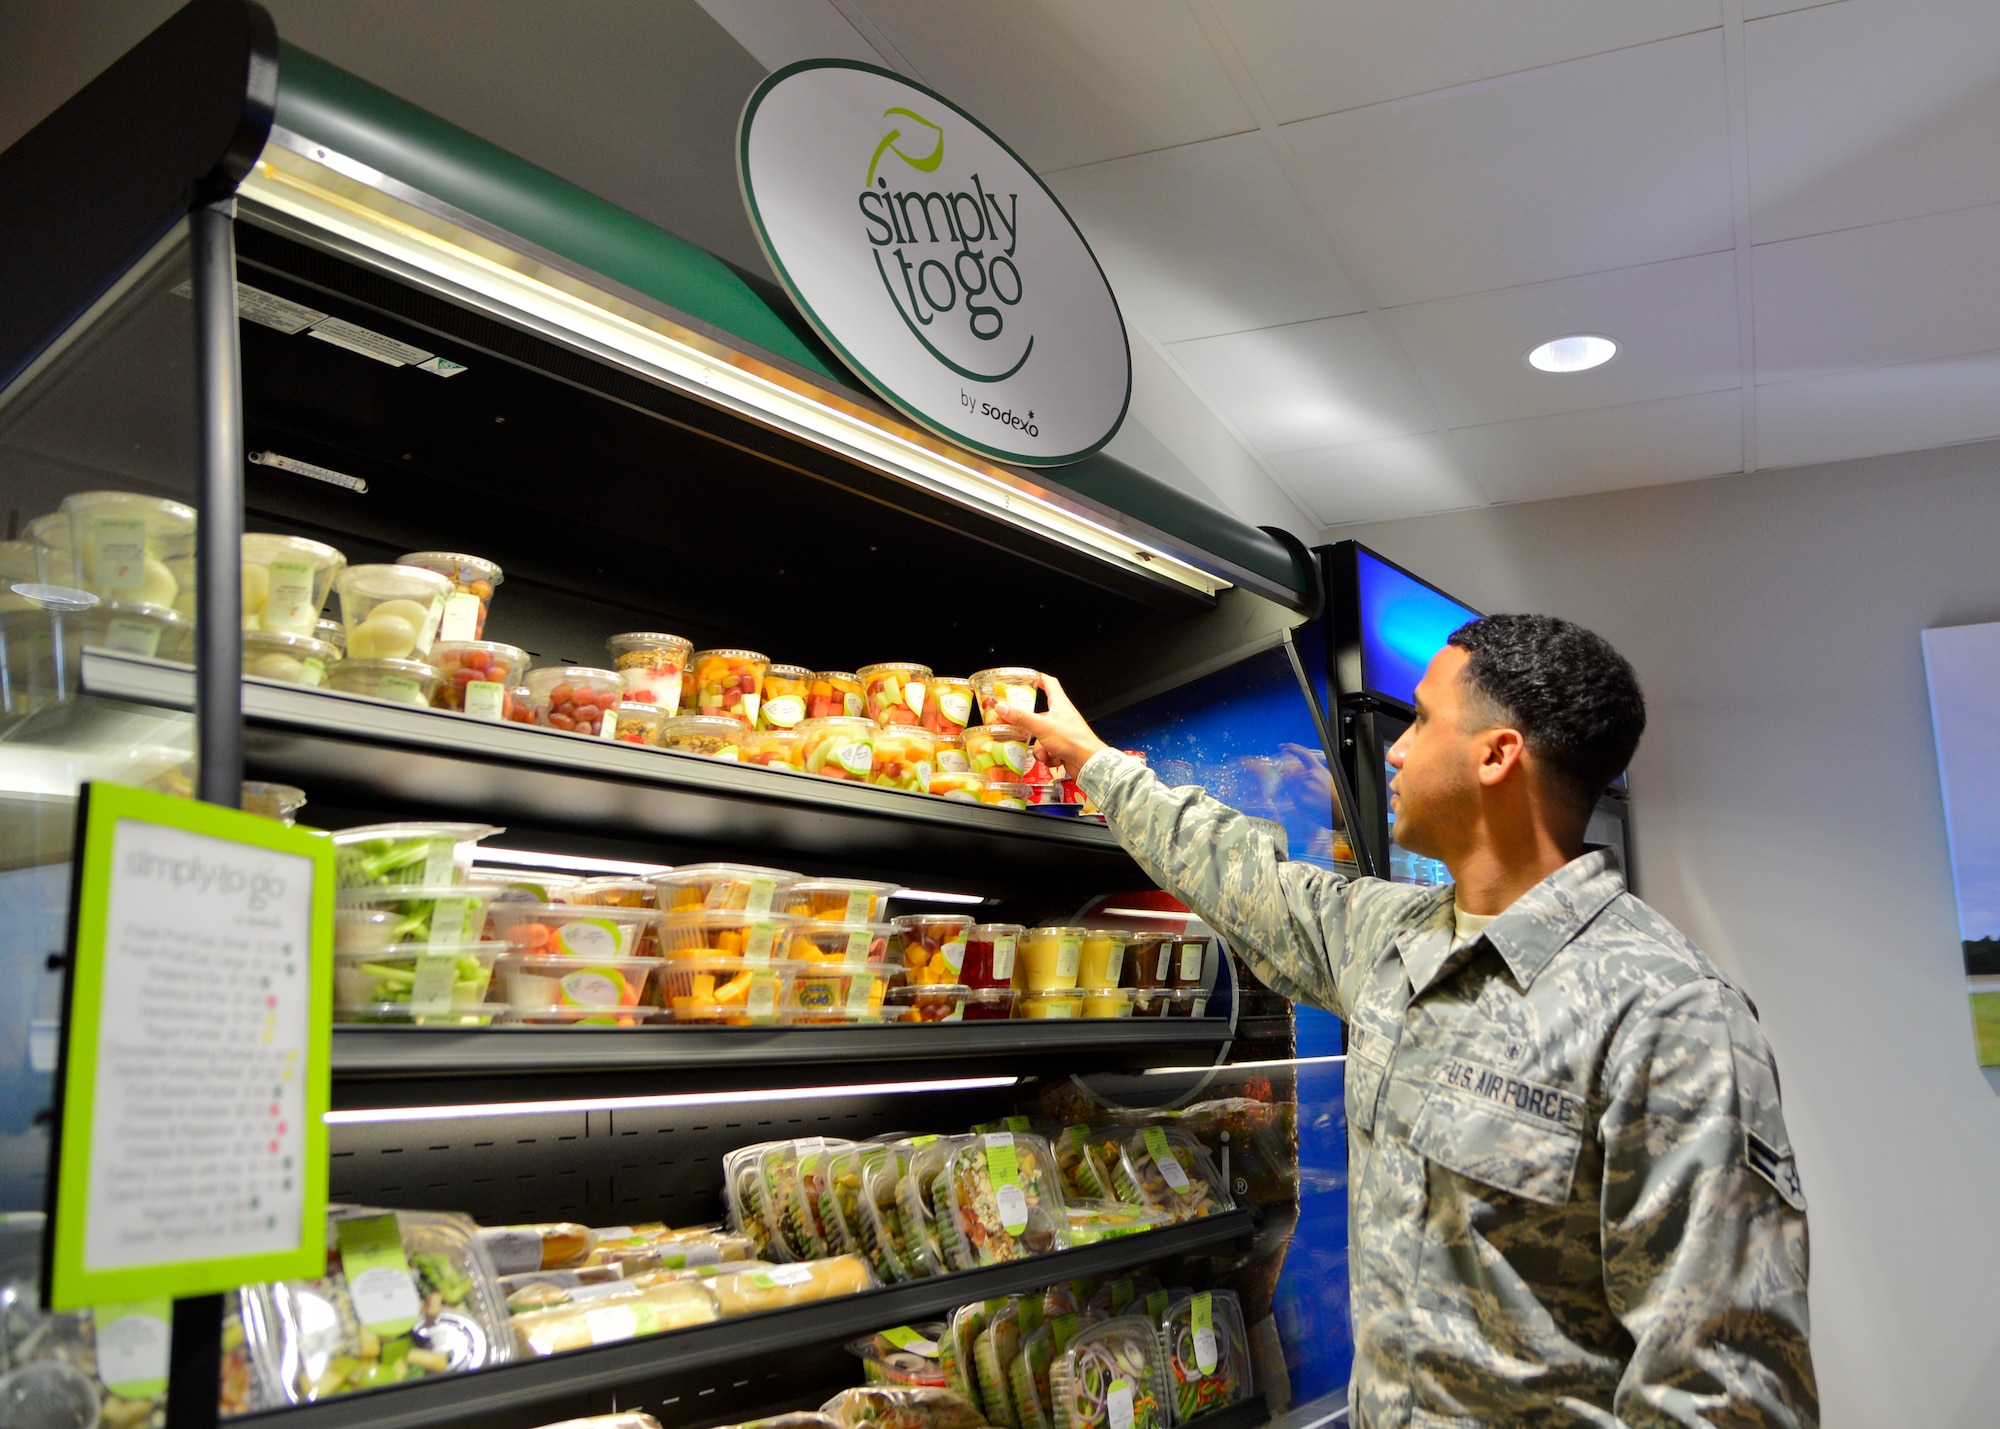 Airman 1st Class Jorge Rijo, 436th Aerospace Medicine Squadron bioenvironmental engineer, grabs a to-go fruit cup during the soft opening of the Patterson Dining Facility Nov. 17, 2015, at Dover Air Force Base, Del. The dining facility now offers grab-n-go items outside of normal operating hours. (U.S. Air Force photo/Senior Airman William Johnson)